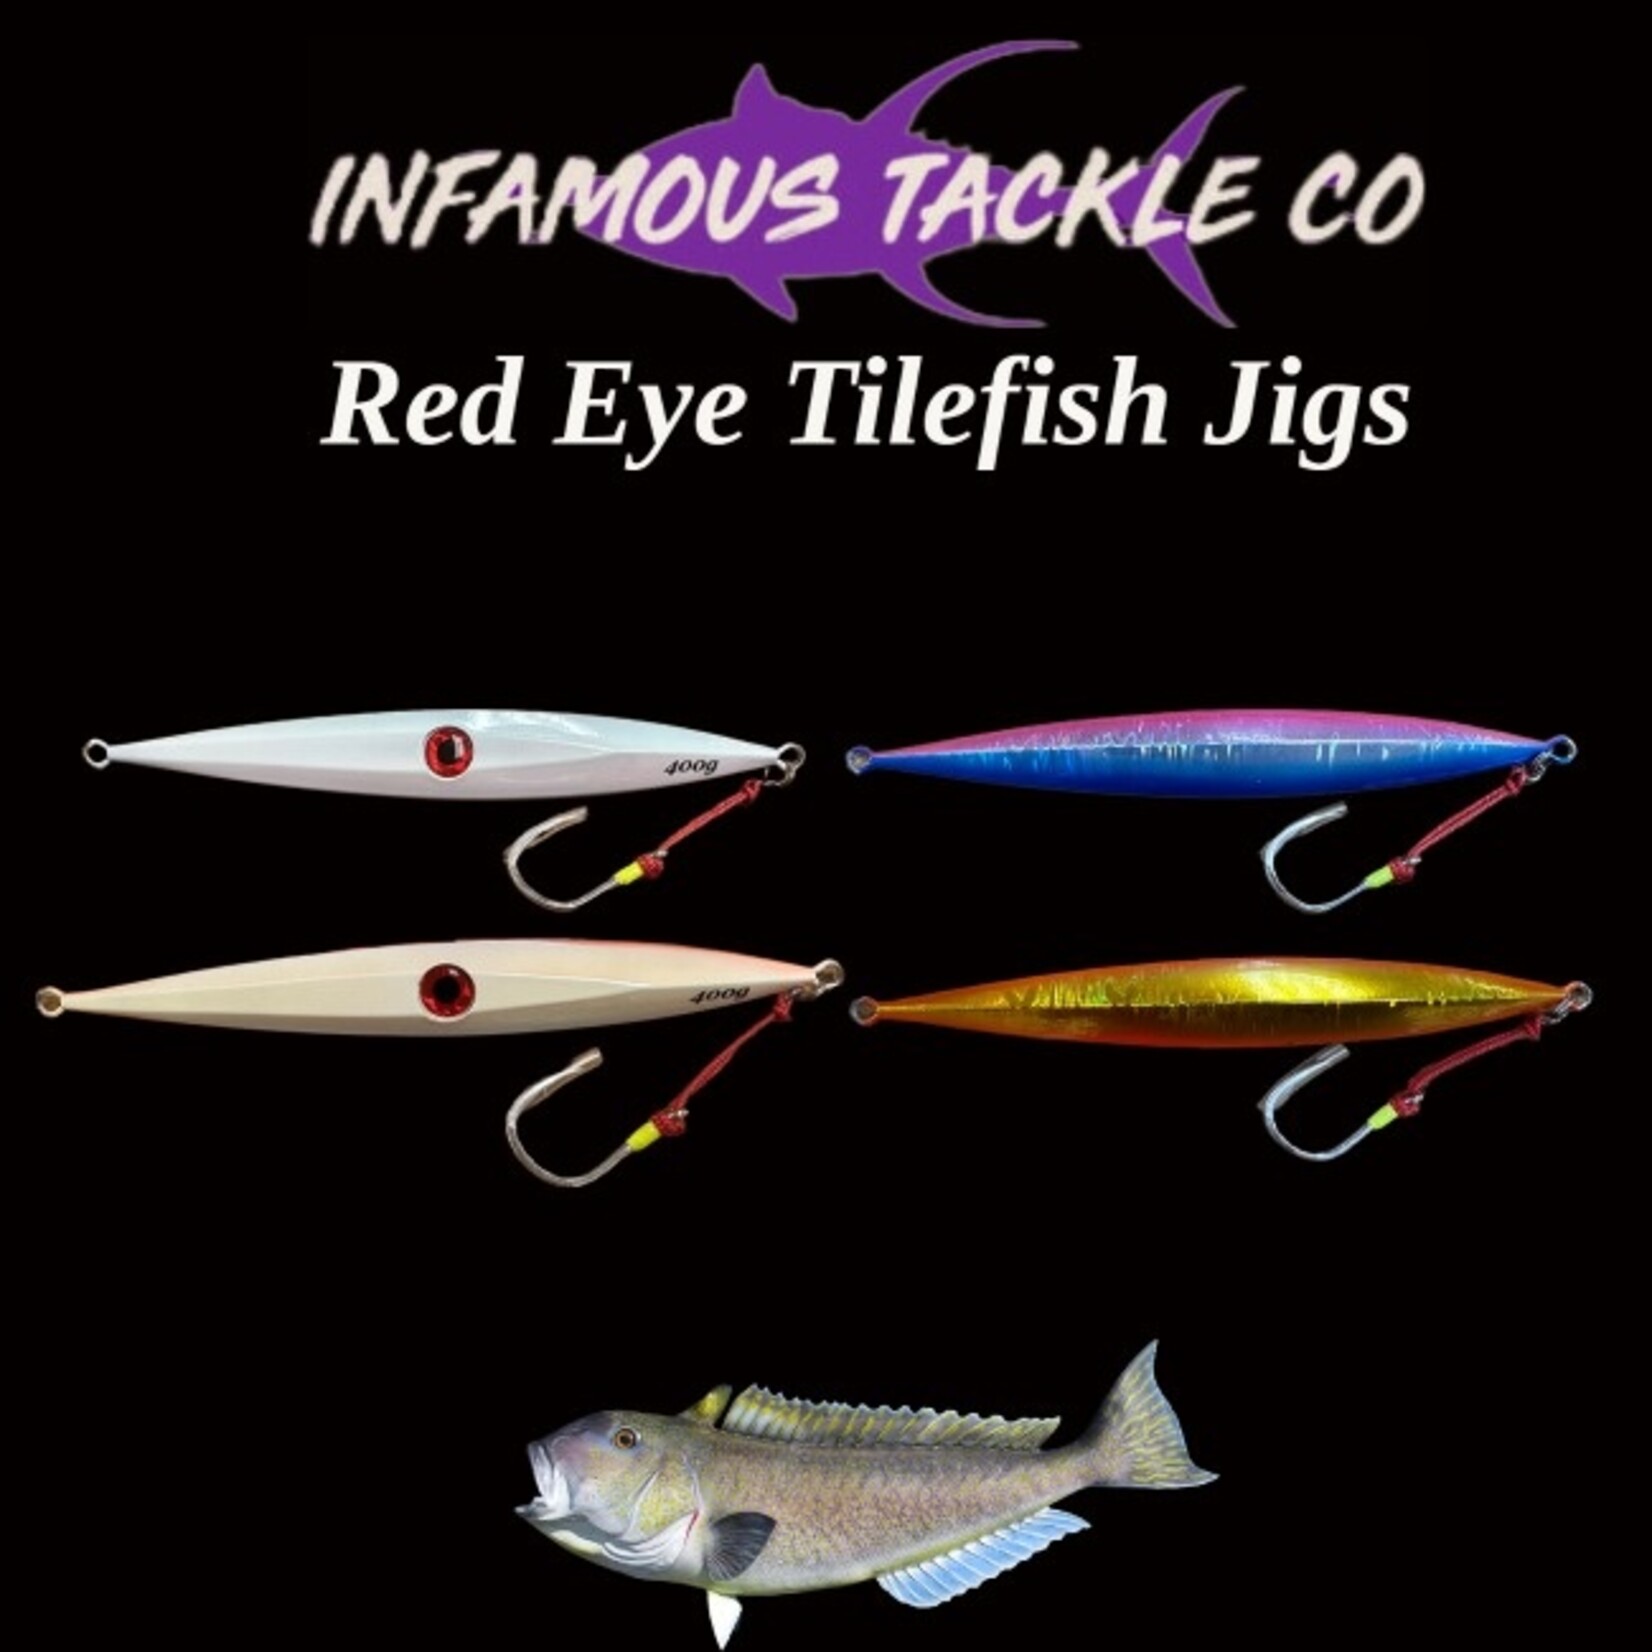 Infamous Tackle Co. Tilefish Red Eye Jigs